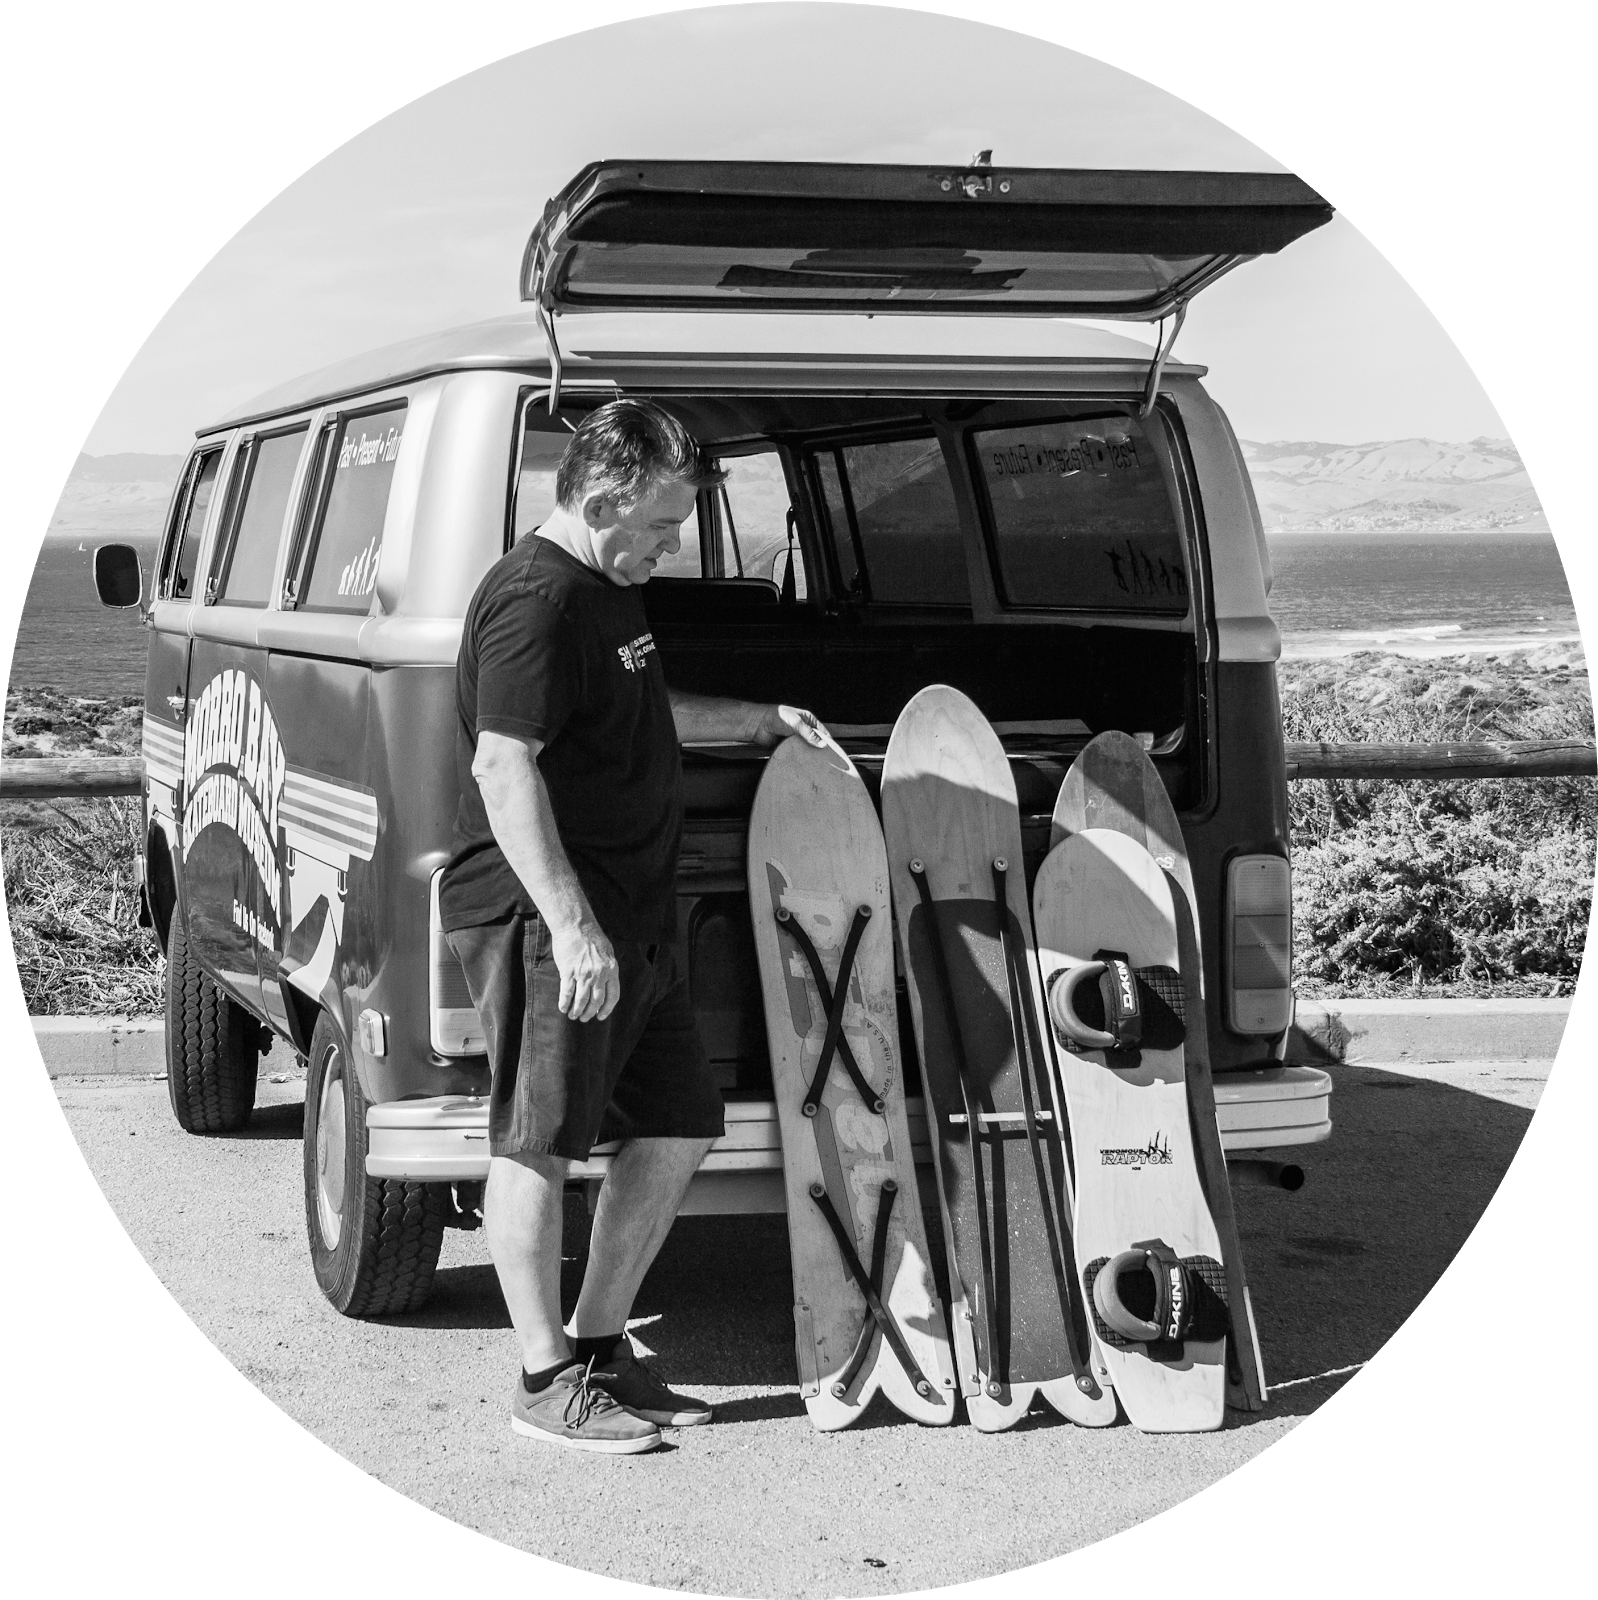 Sandboard pioneer Jack Smith in front of his van with three boards.